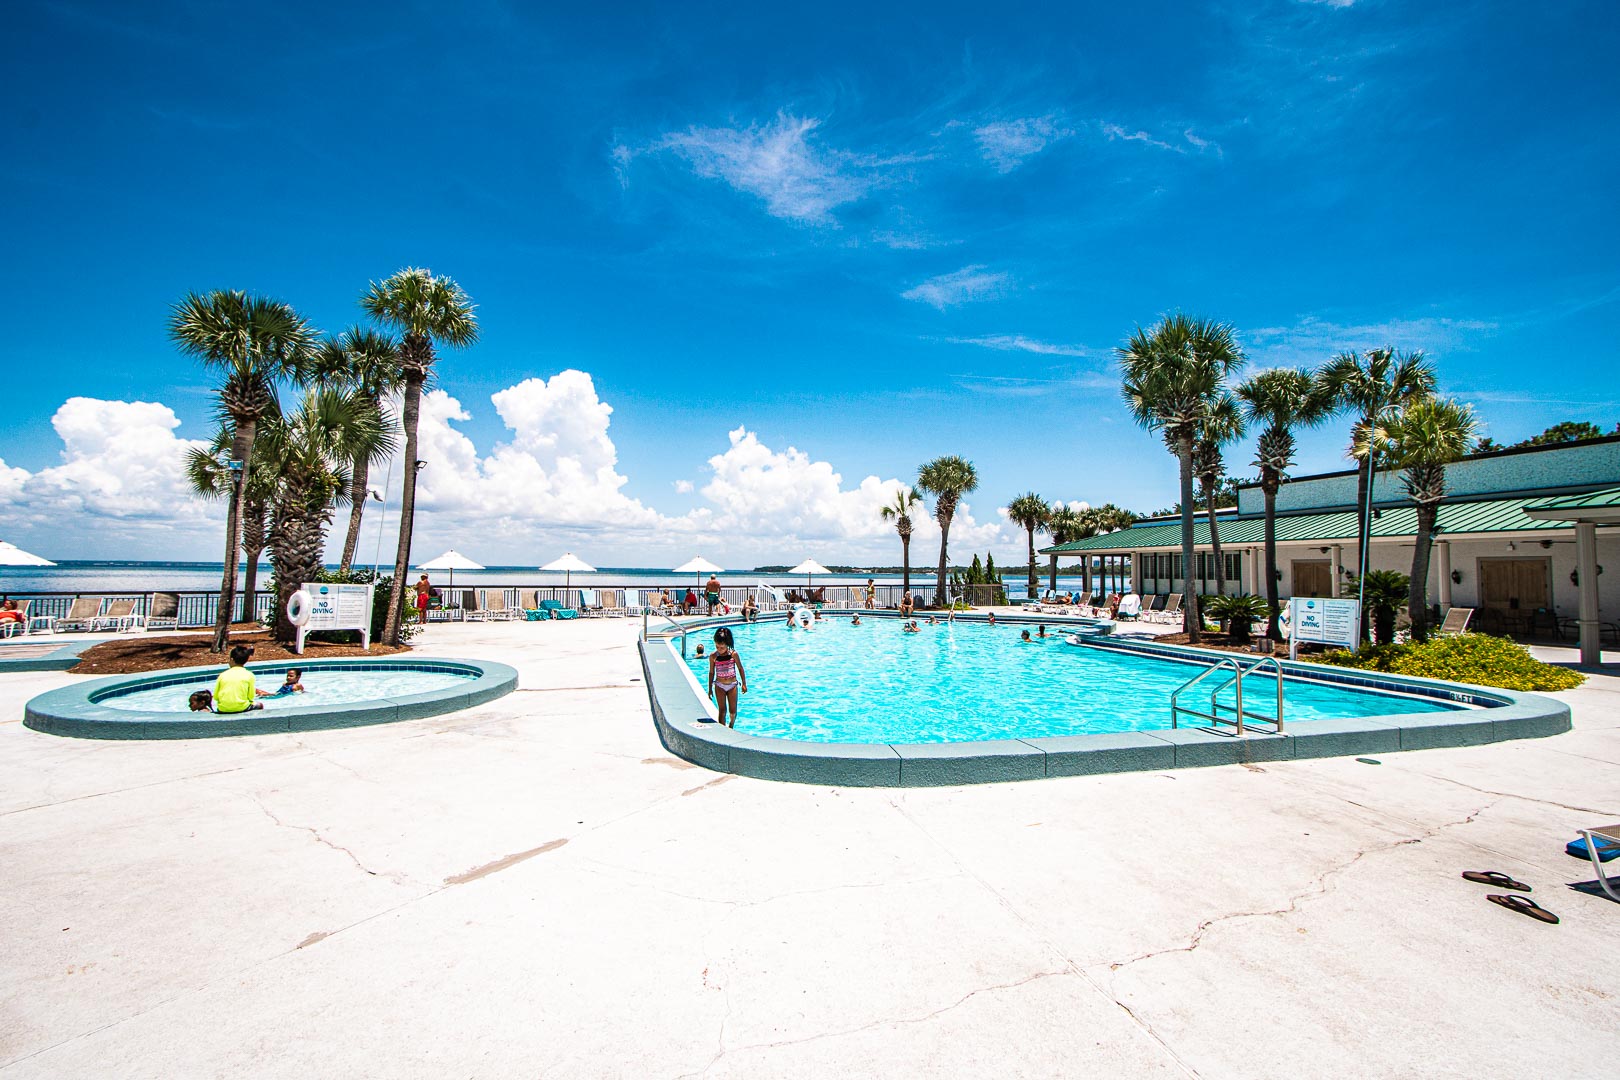 A colorful swimming pool at VRI's Bay Club of Sandestin in Florida.